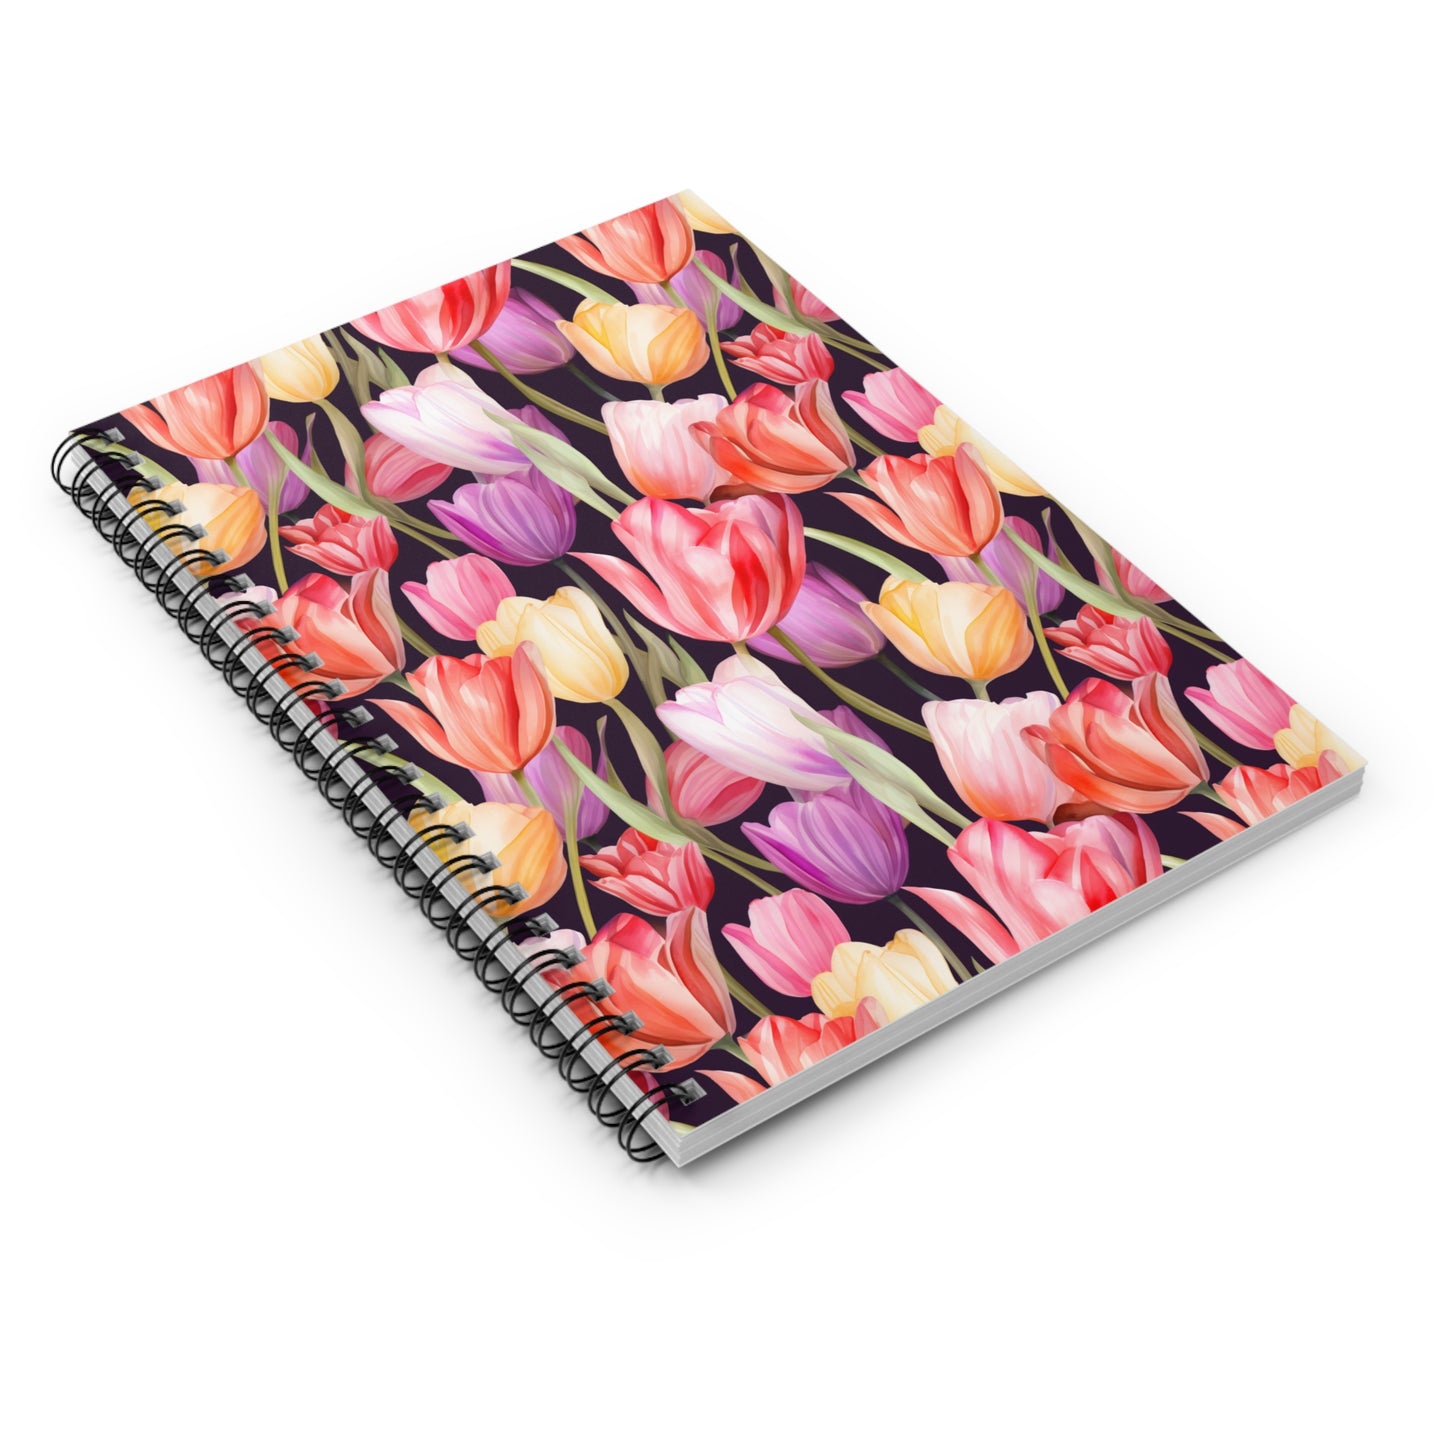 Midnight Tulip Dreams Spiral Notebook - Ruled Line (6" x 8")